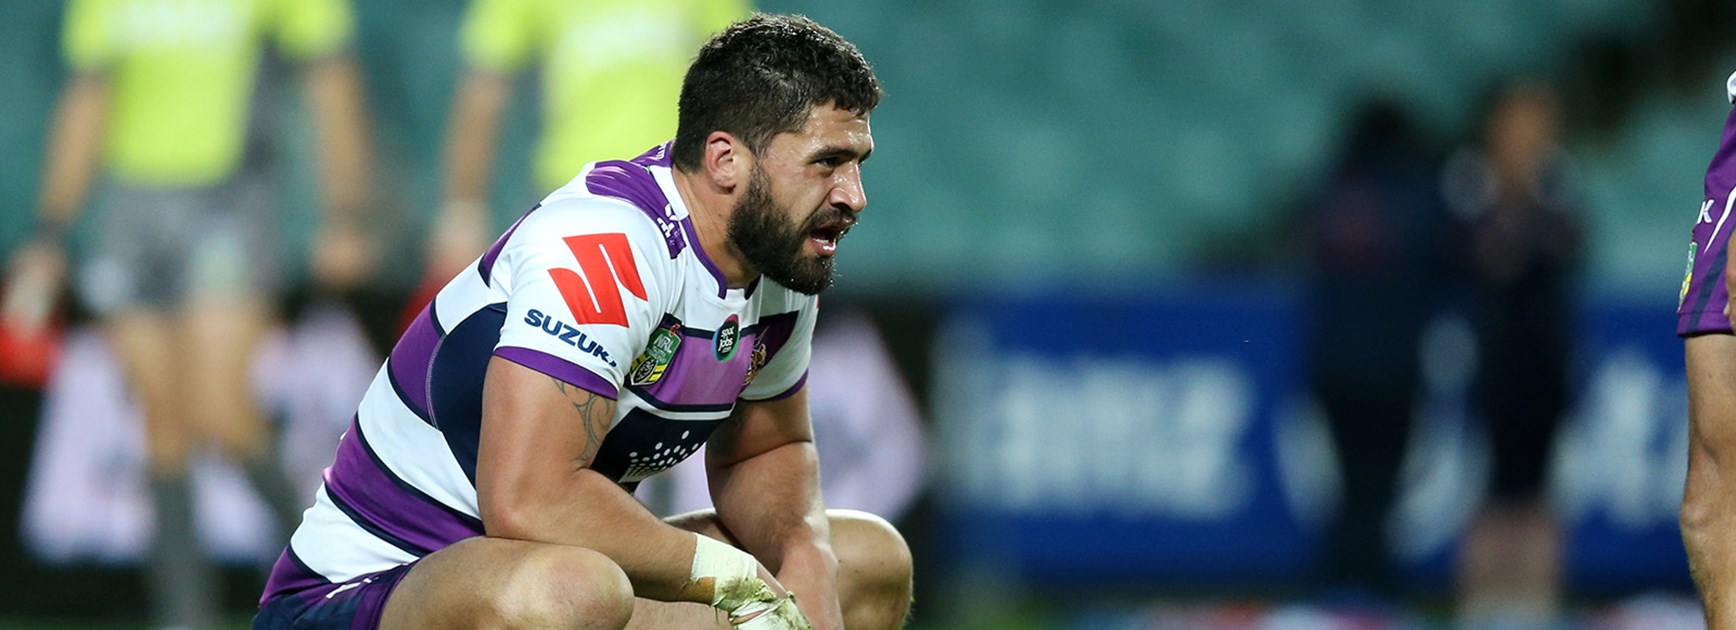 Melbourne's Jesse Bromwich on his haunches after the Roosters dominated across the park at Allianz Stadium in Round 12.